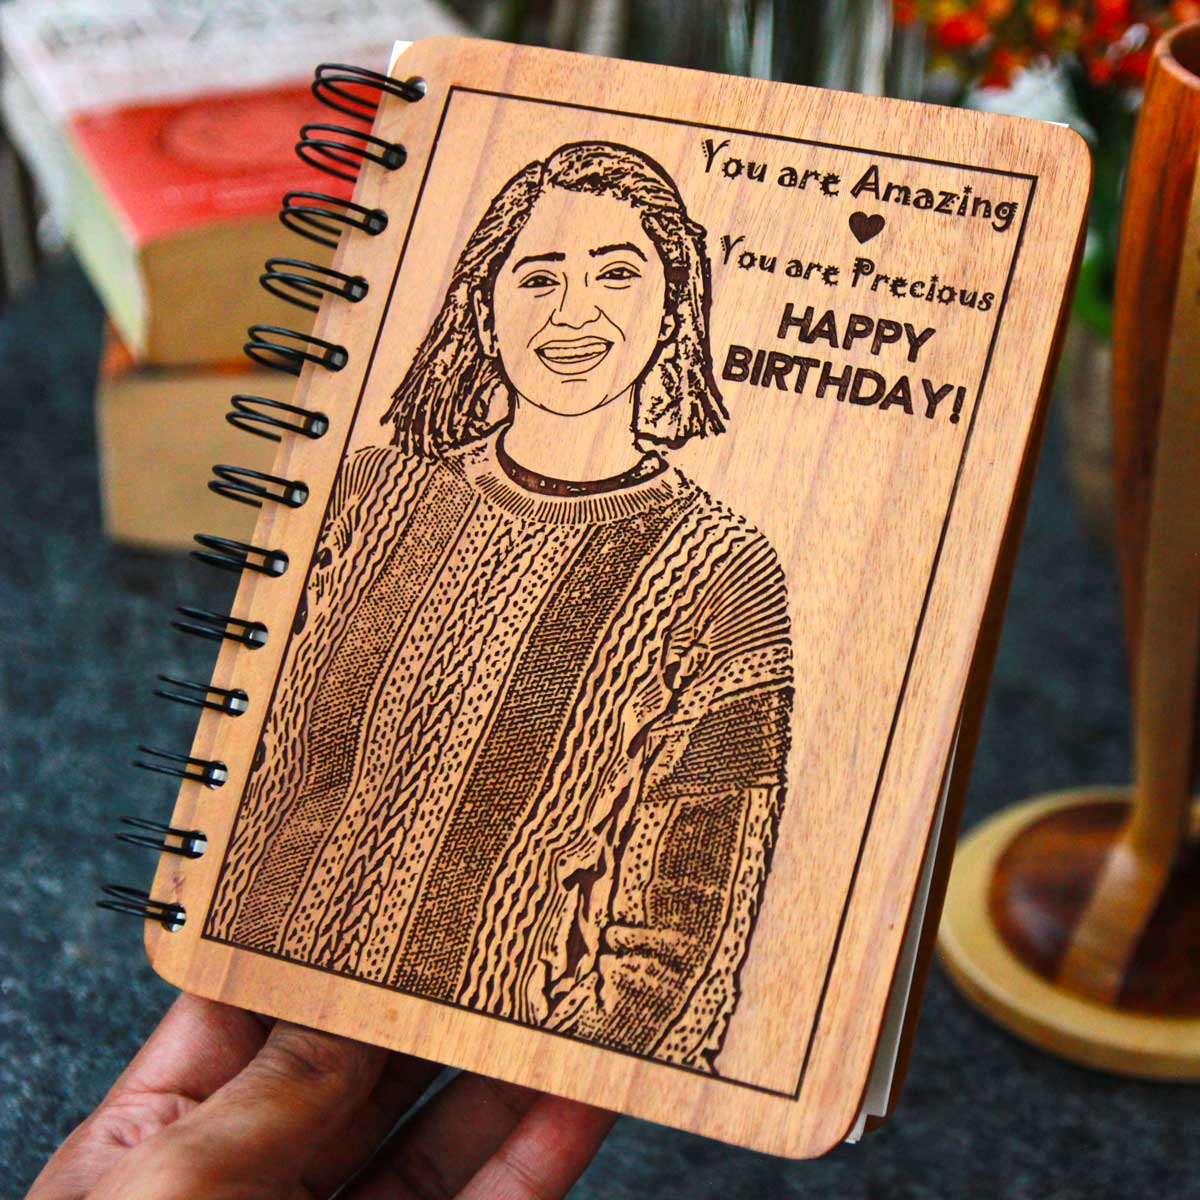 Birthday Wishes For Friend Engraved On Wooden Notebook With Photo